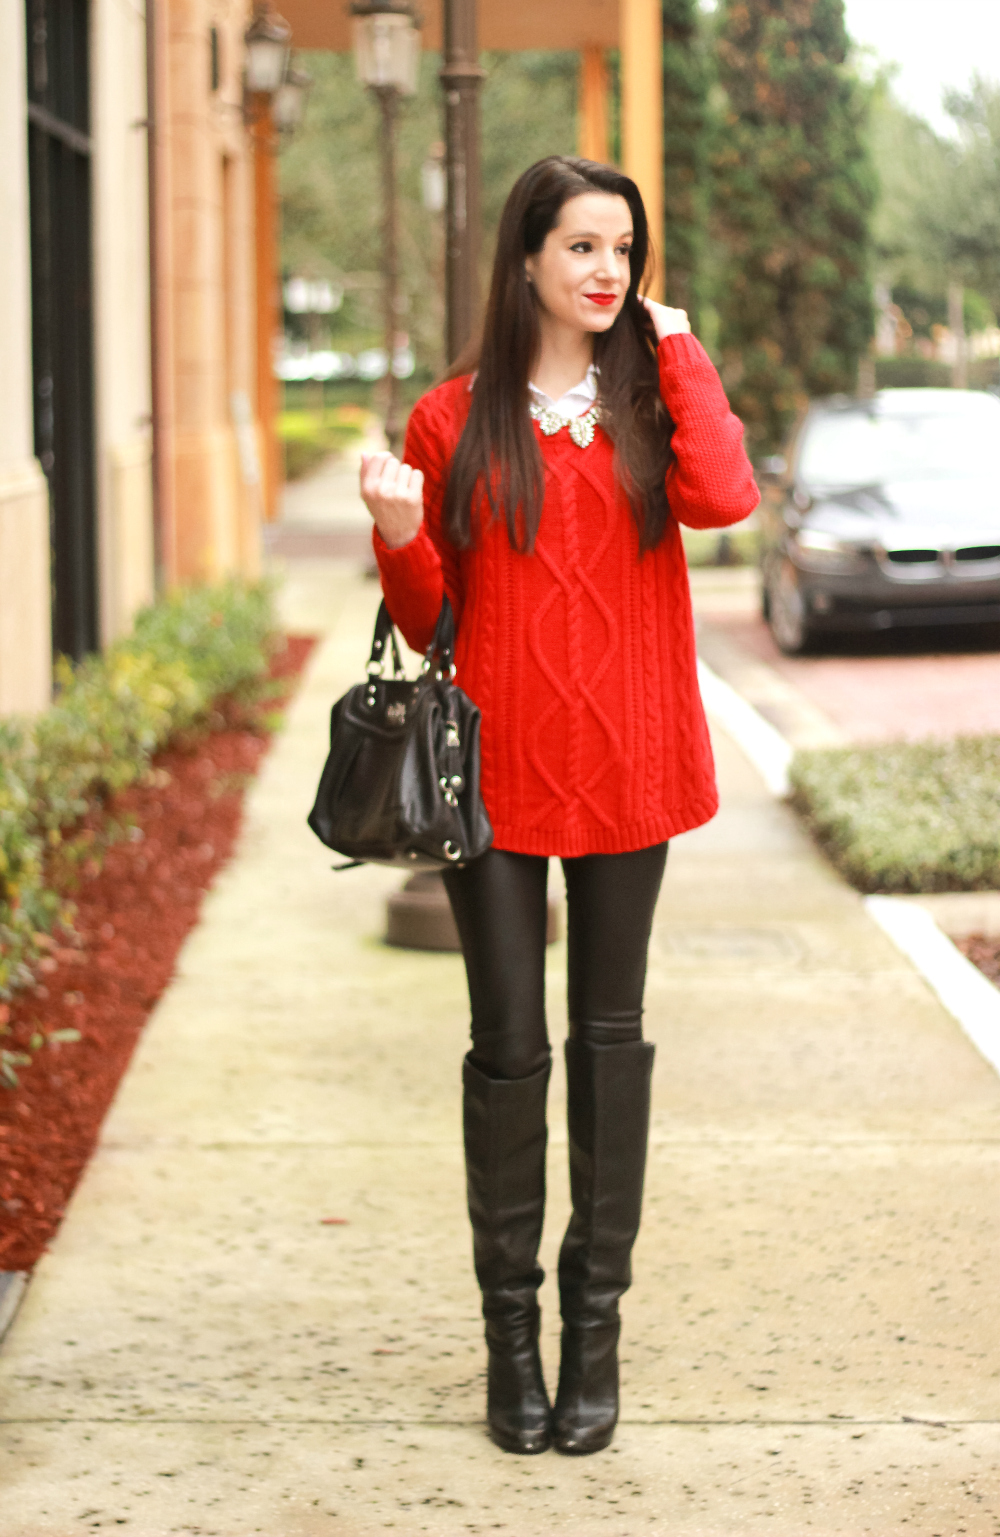 Oversized Red Cable Knit Sweater, Red Cable Knit Sweater, Holiday Outfit, Casual Sweater Outfit, Stephanie Ziajka, Diary of a Debutante